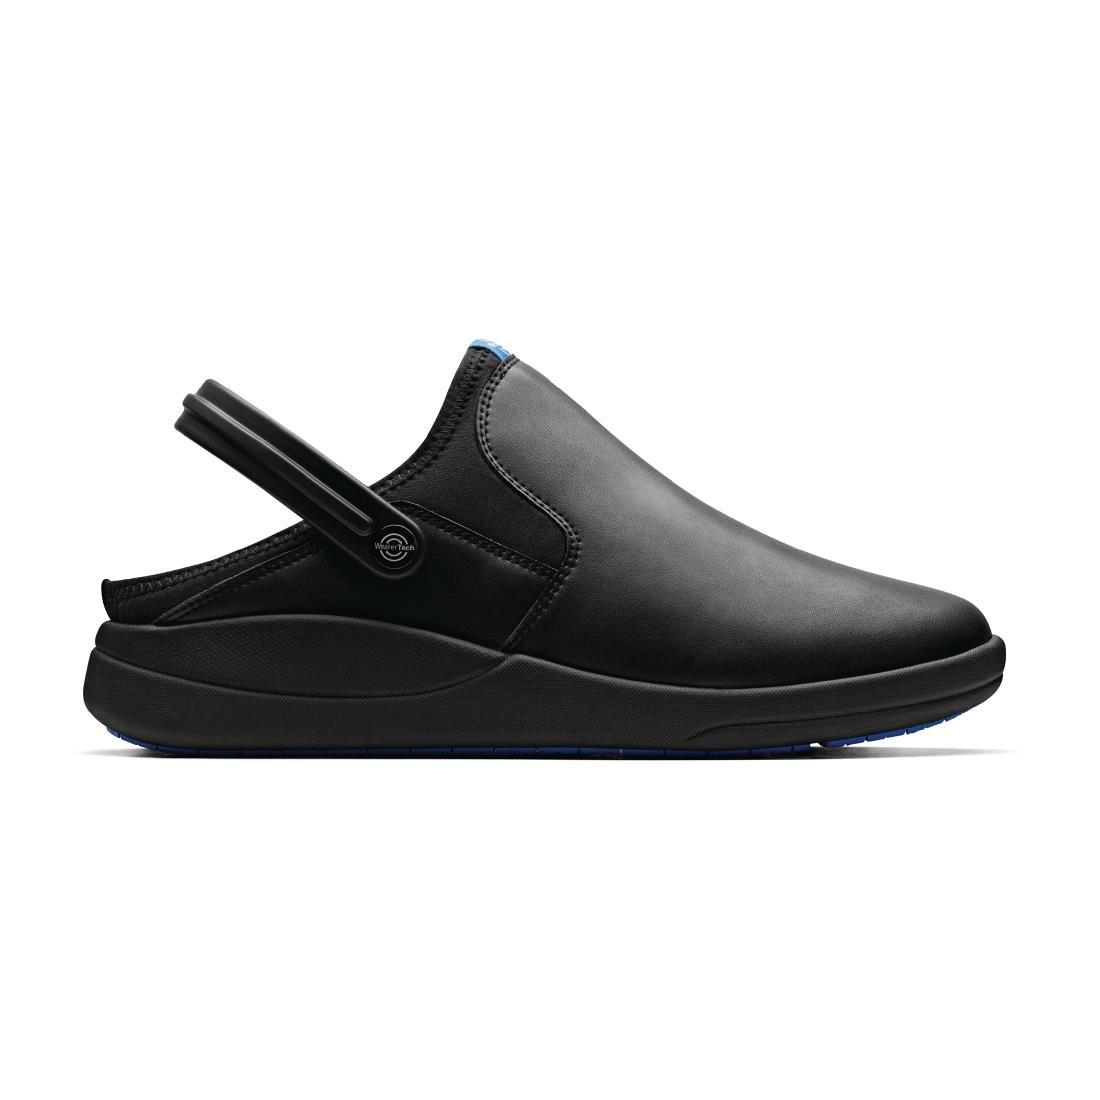 WearerTech Refresh Clog Black with Firm Insoles Size 46 - BB556-11  - 3